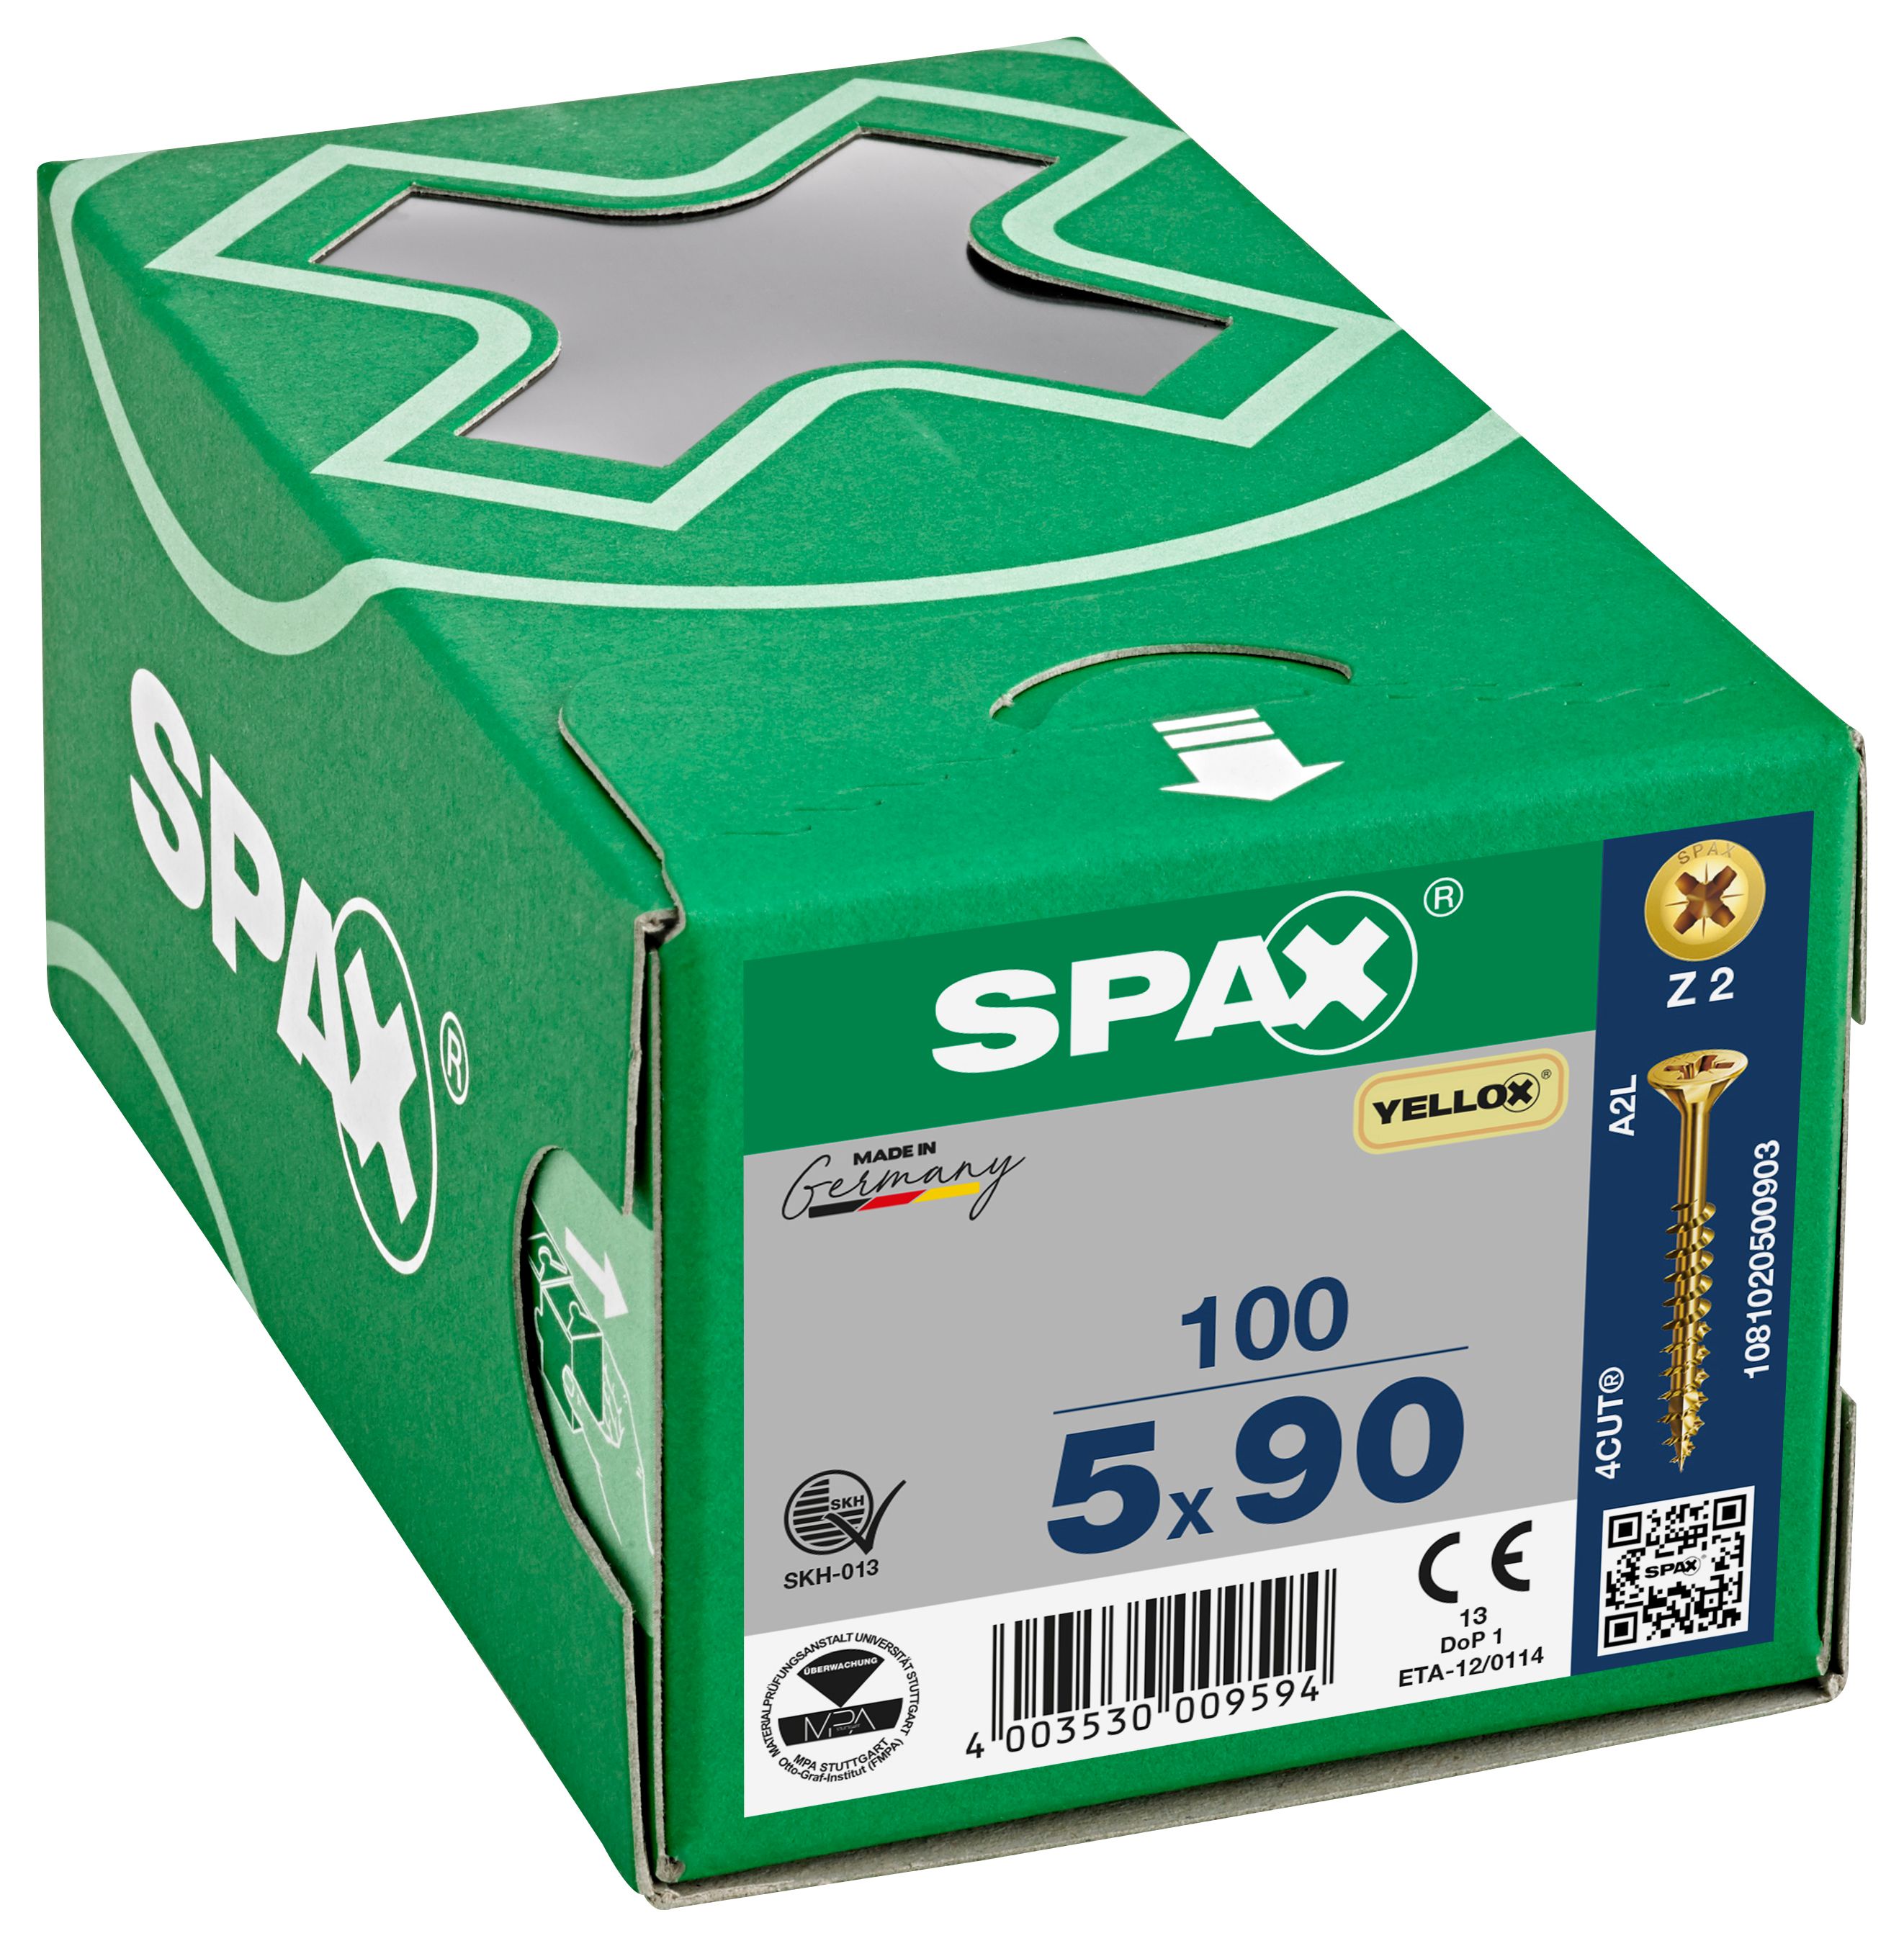 Image of Spax Pz Countersunk Yellox Screws - 5x90mm Pack Of 100